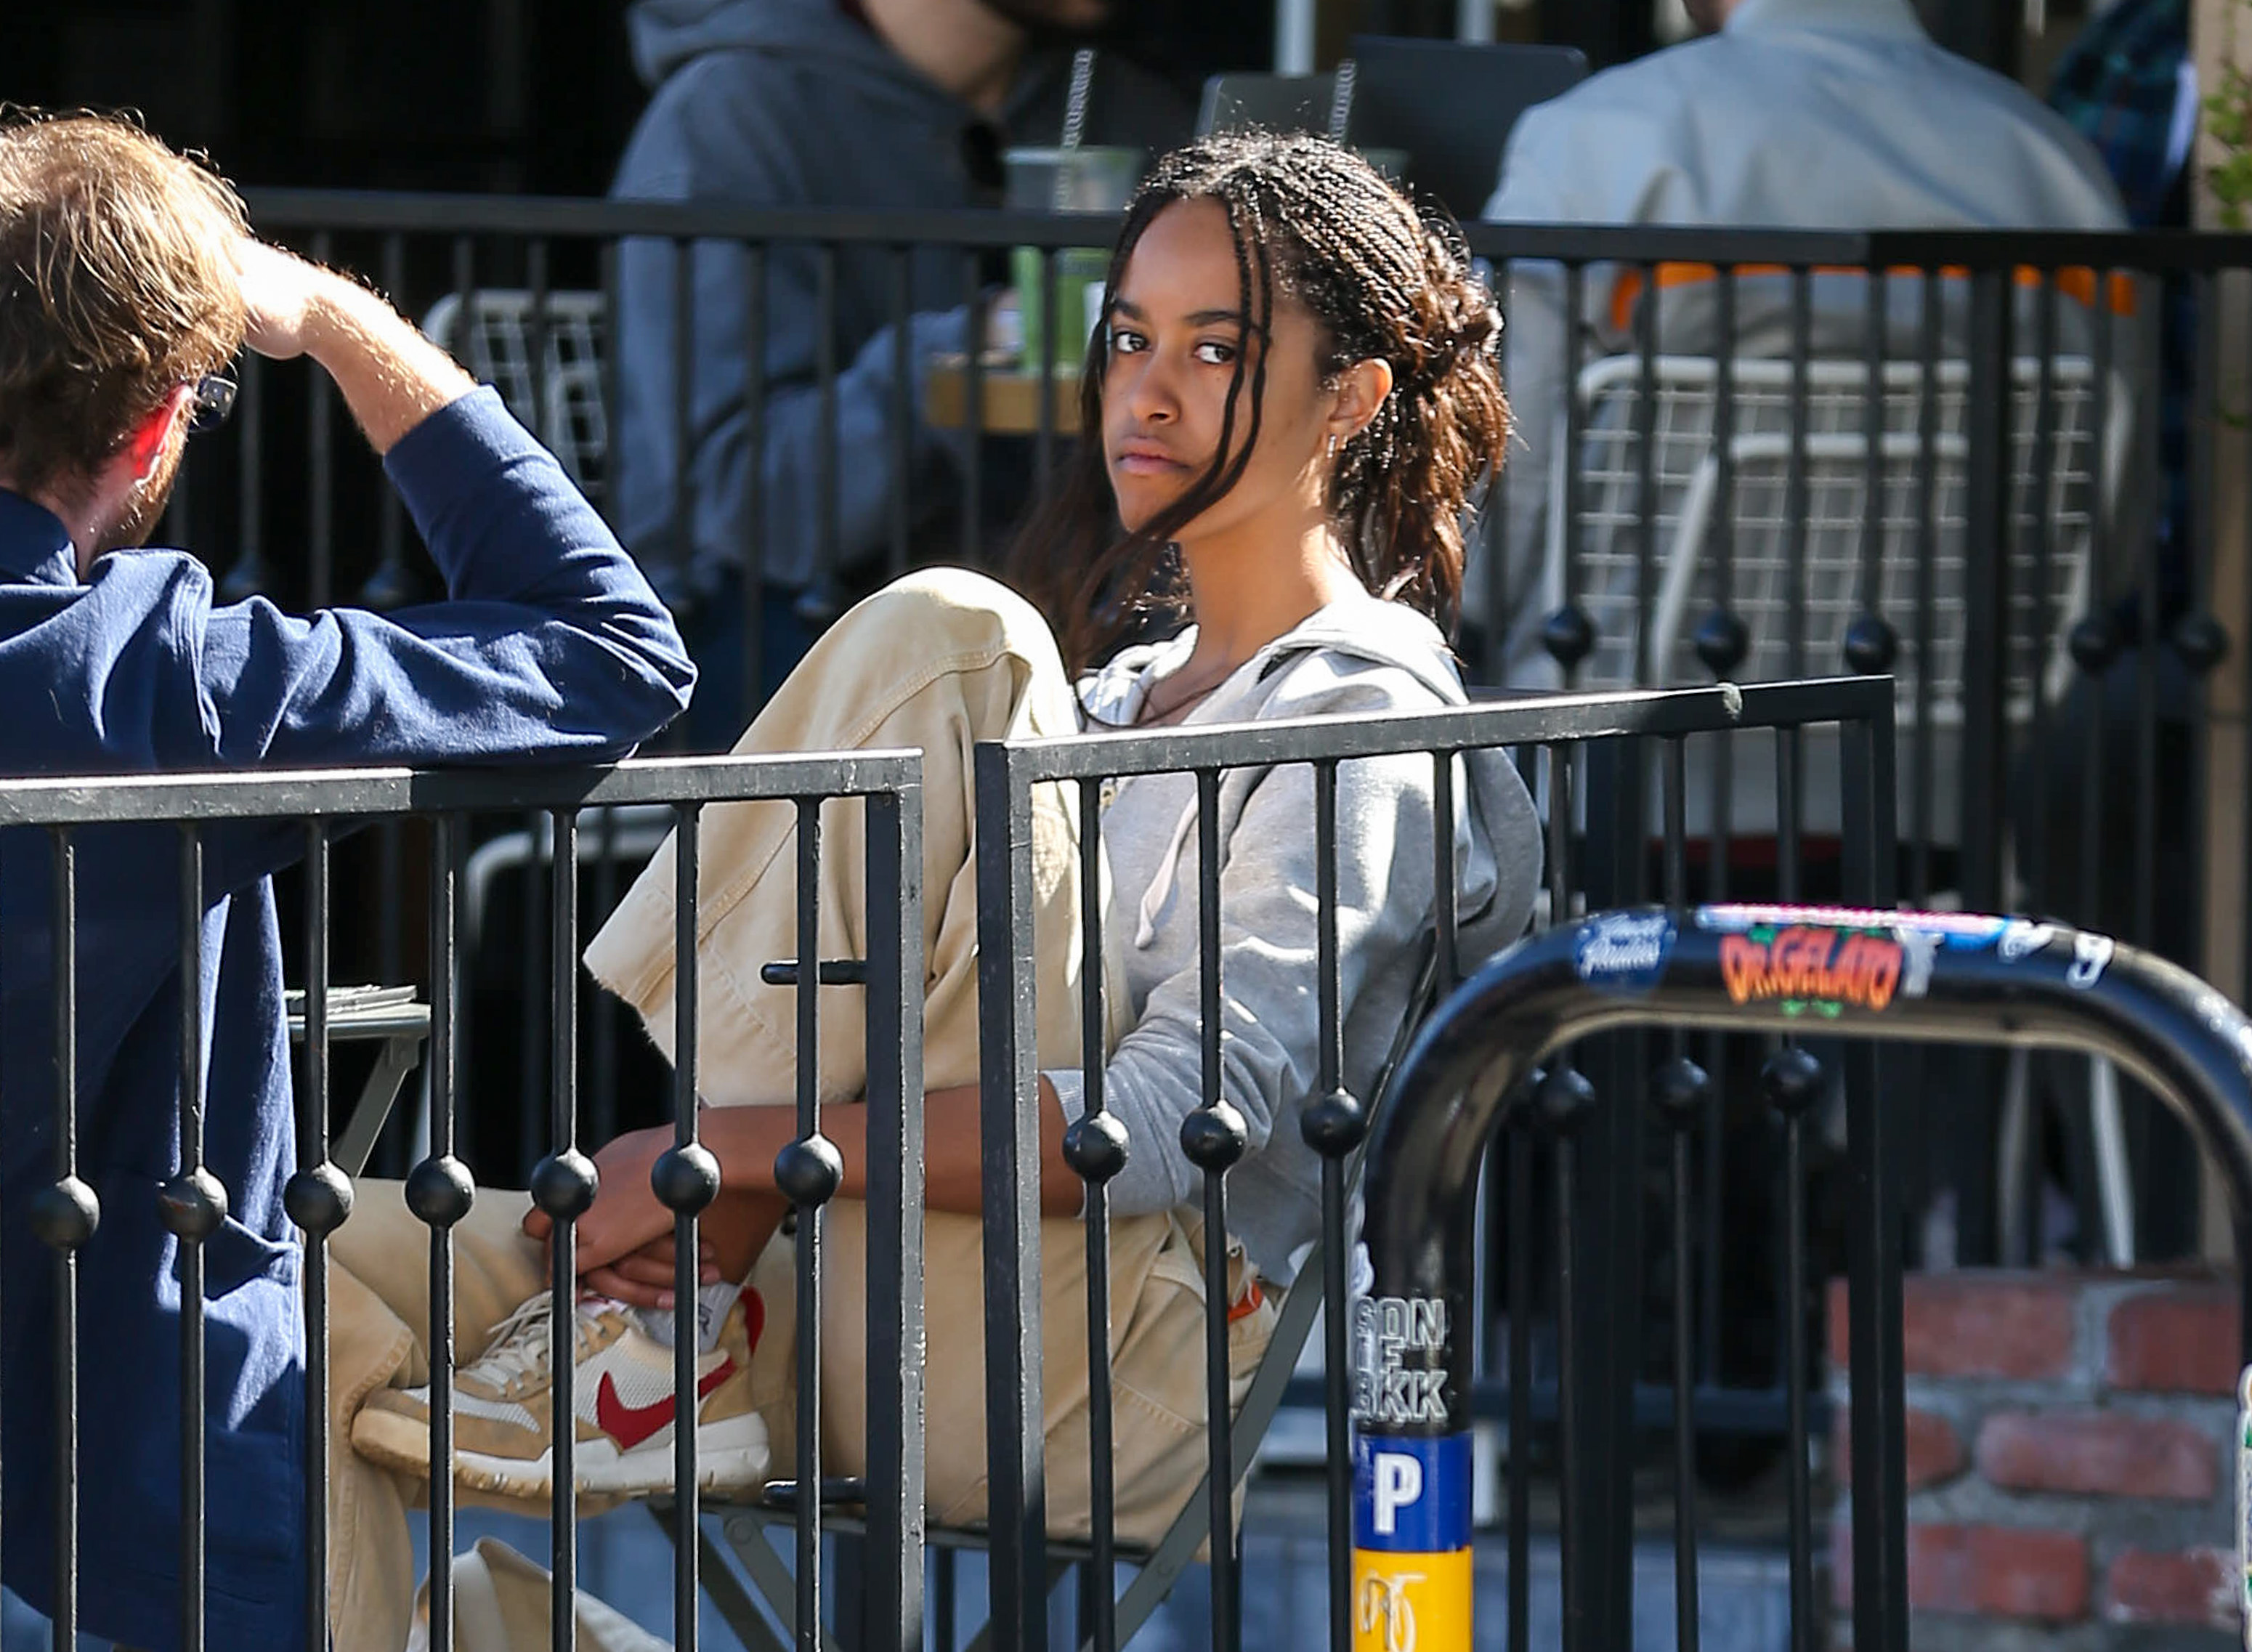 Malia Obama is seen in Los Angeles, California on January 25, 2022 | Source: Getty Images